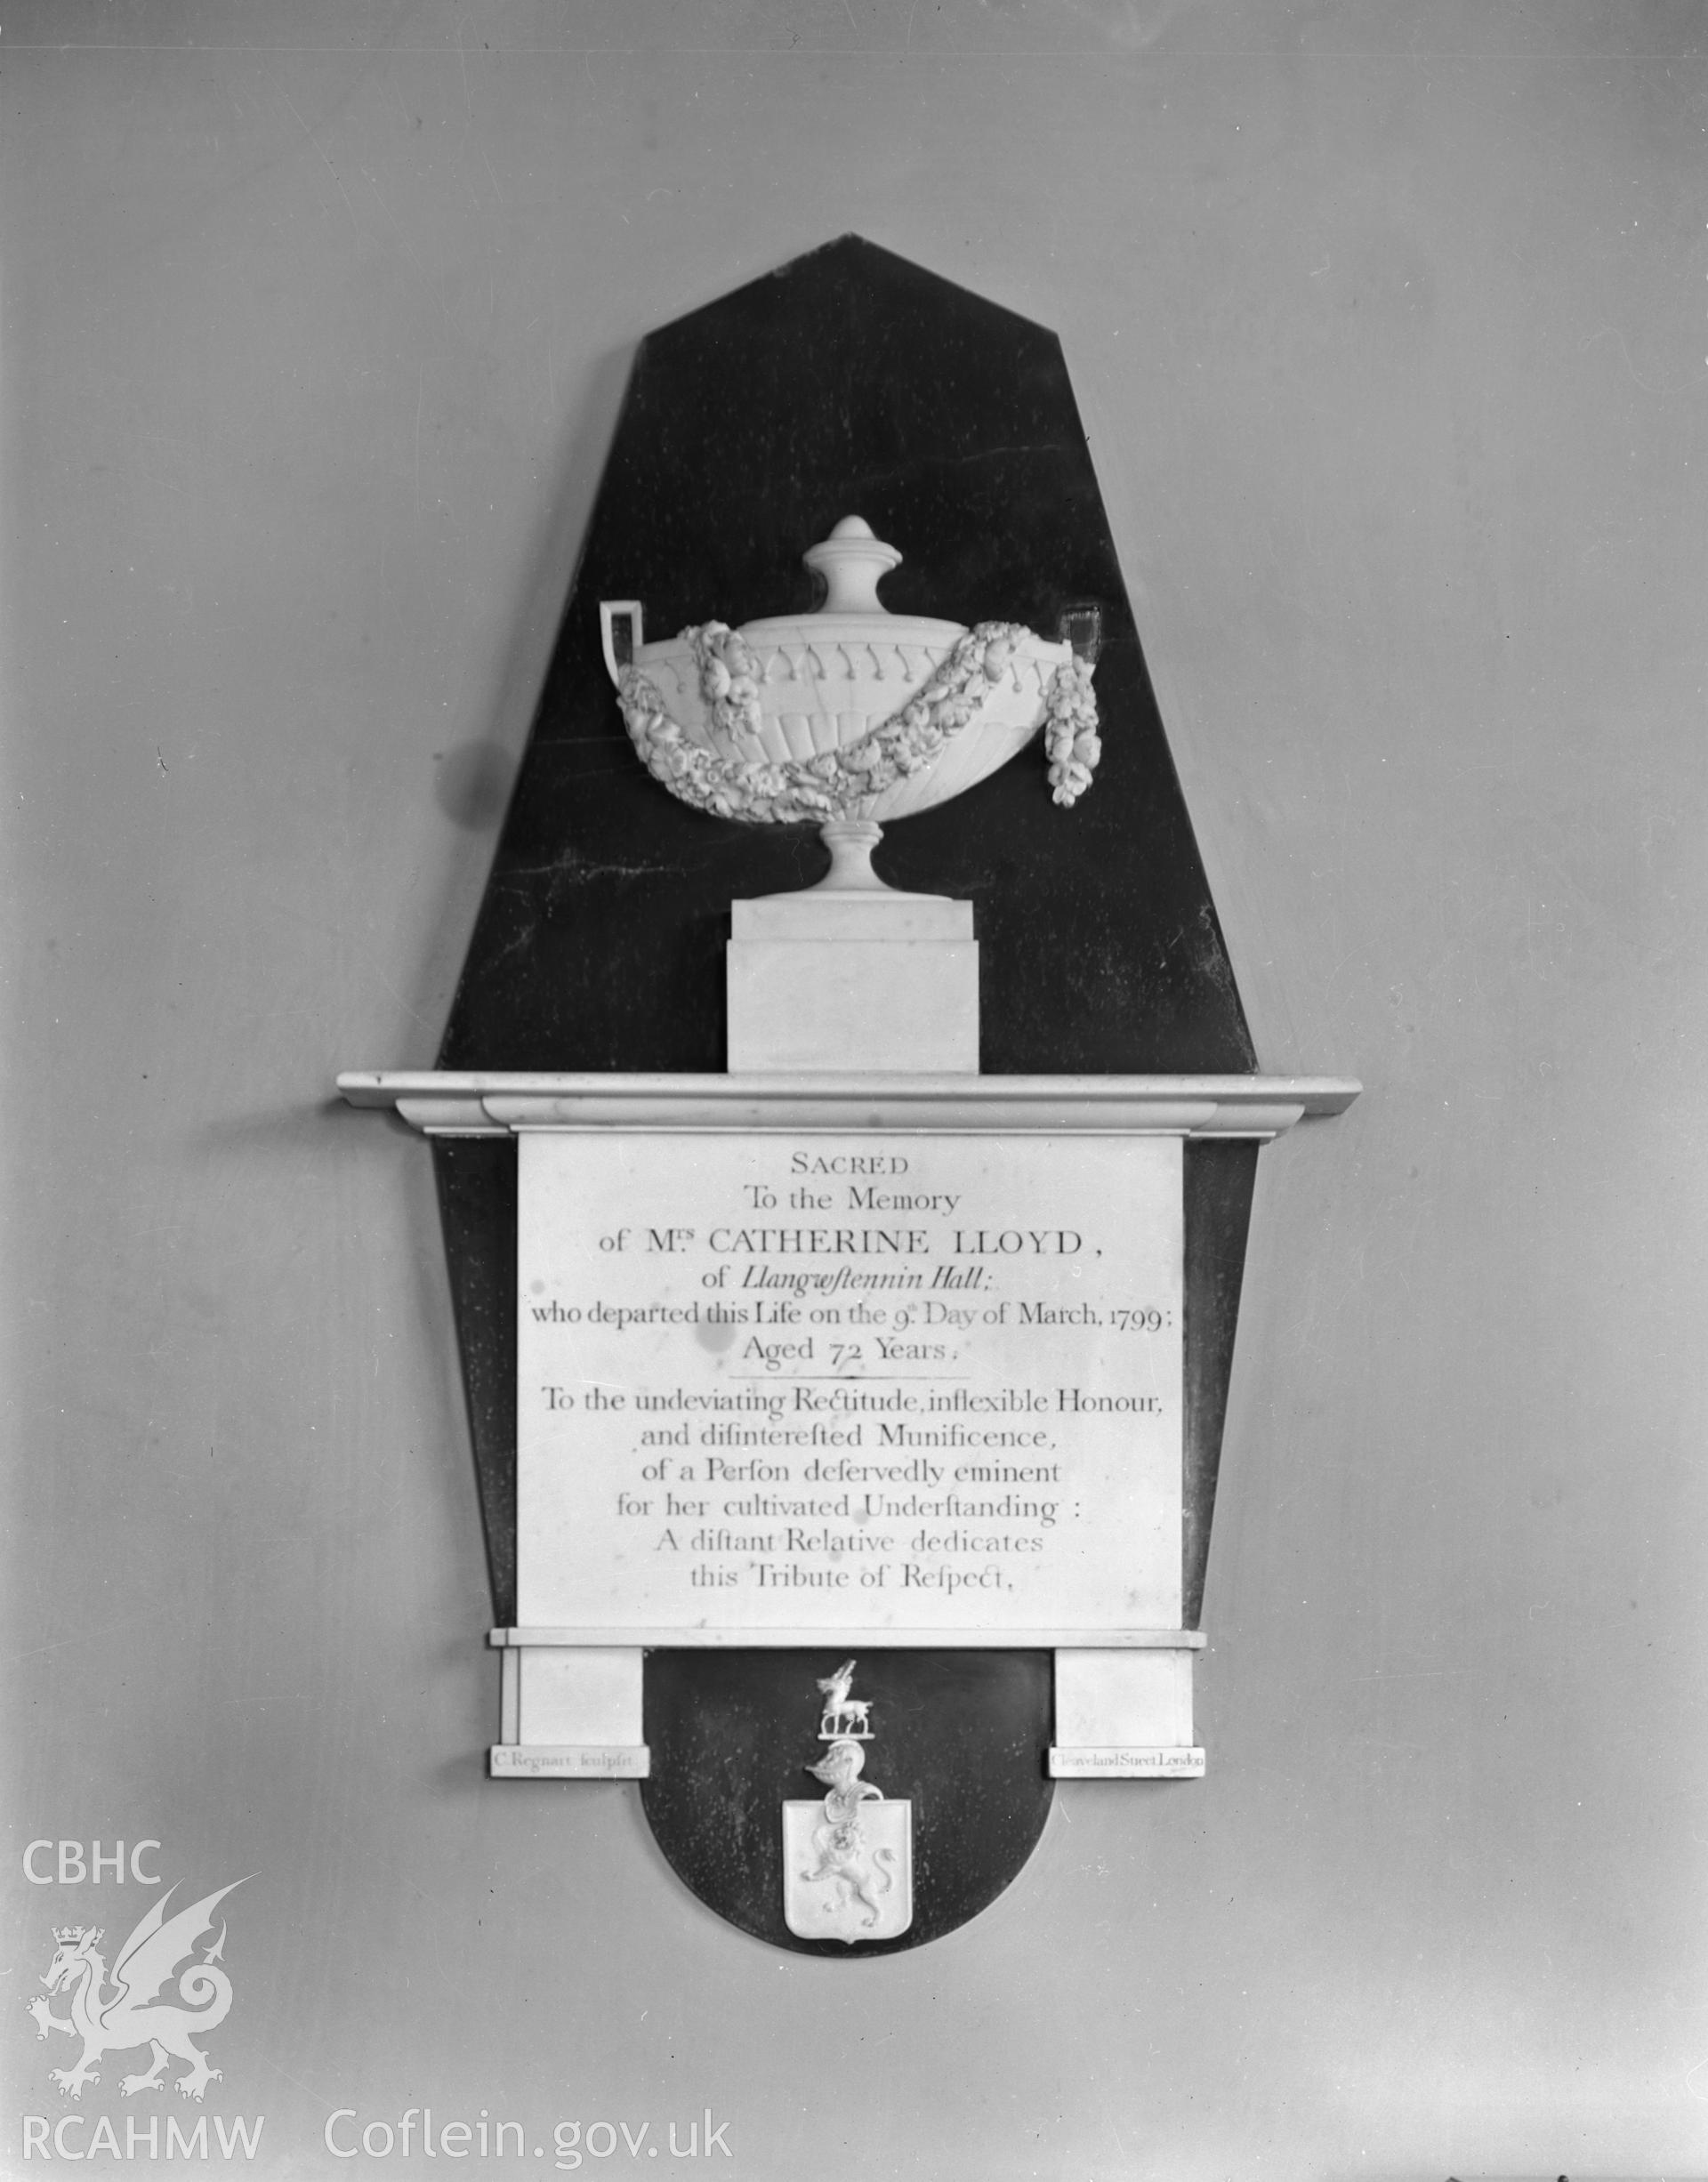 Interior view showing wall-mounted memorial.